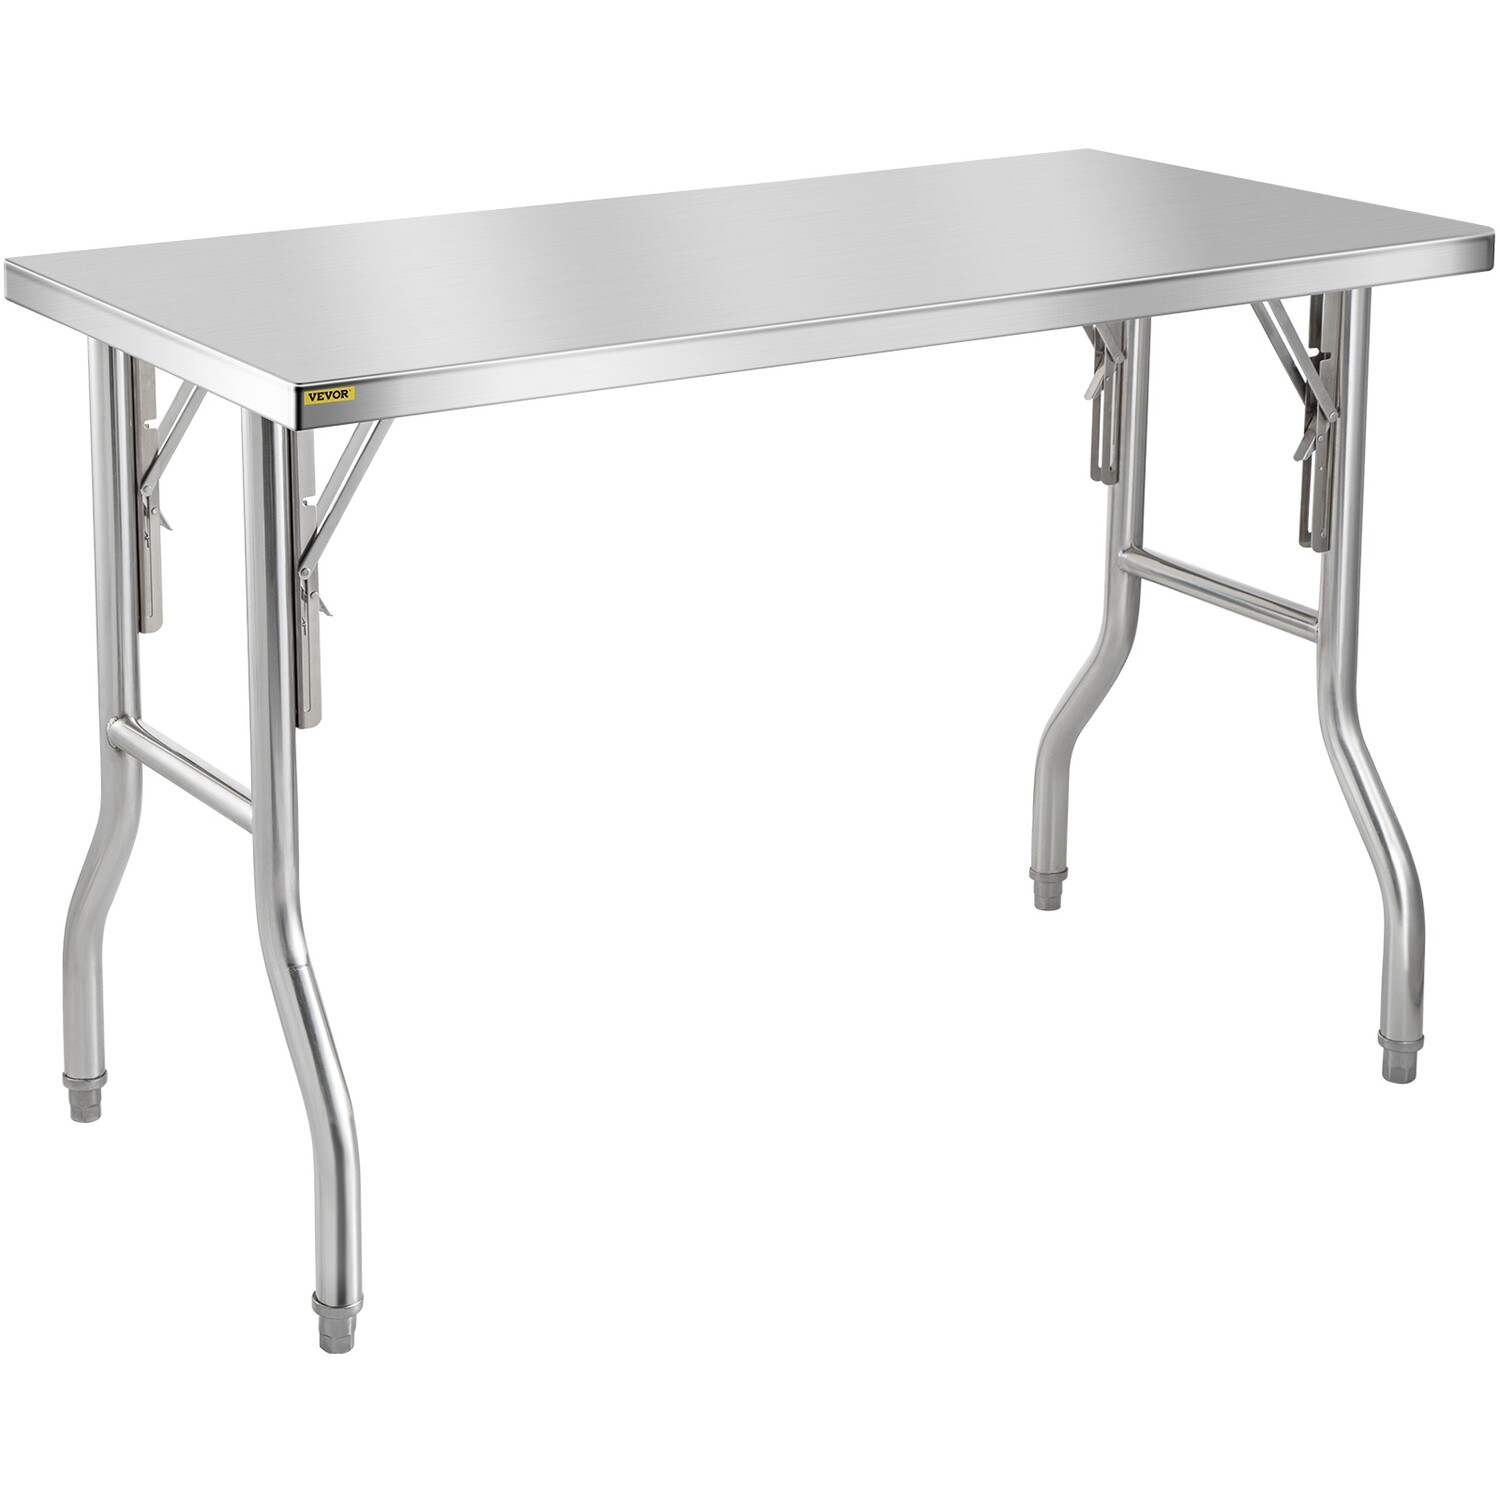 Commercial Prep Table 48 x 24 Inch Folding Stainless Steel Work Table